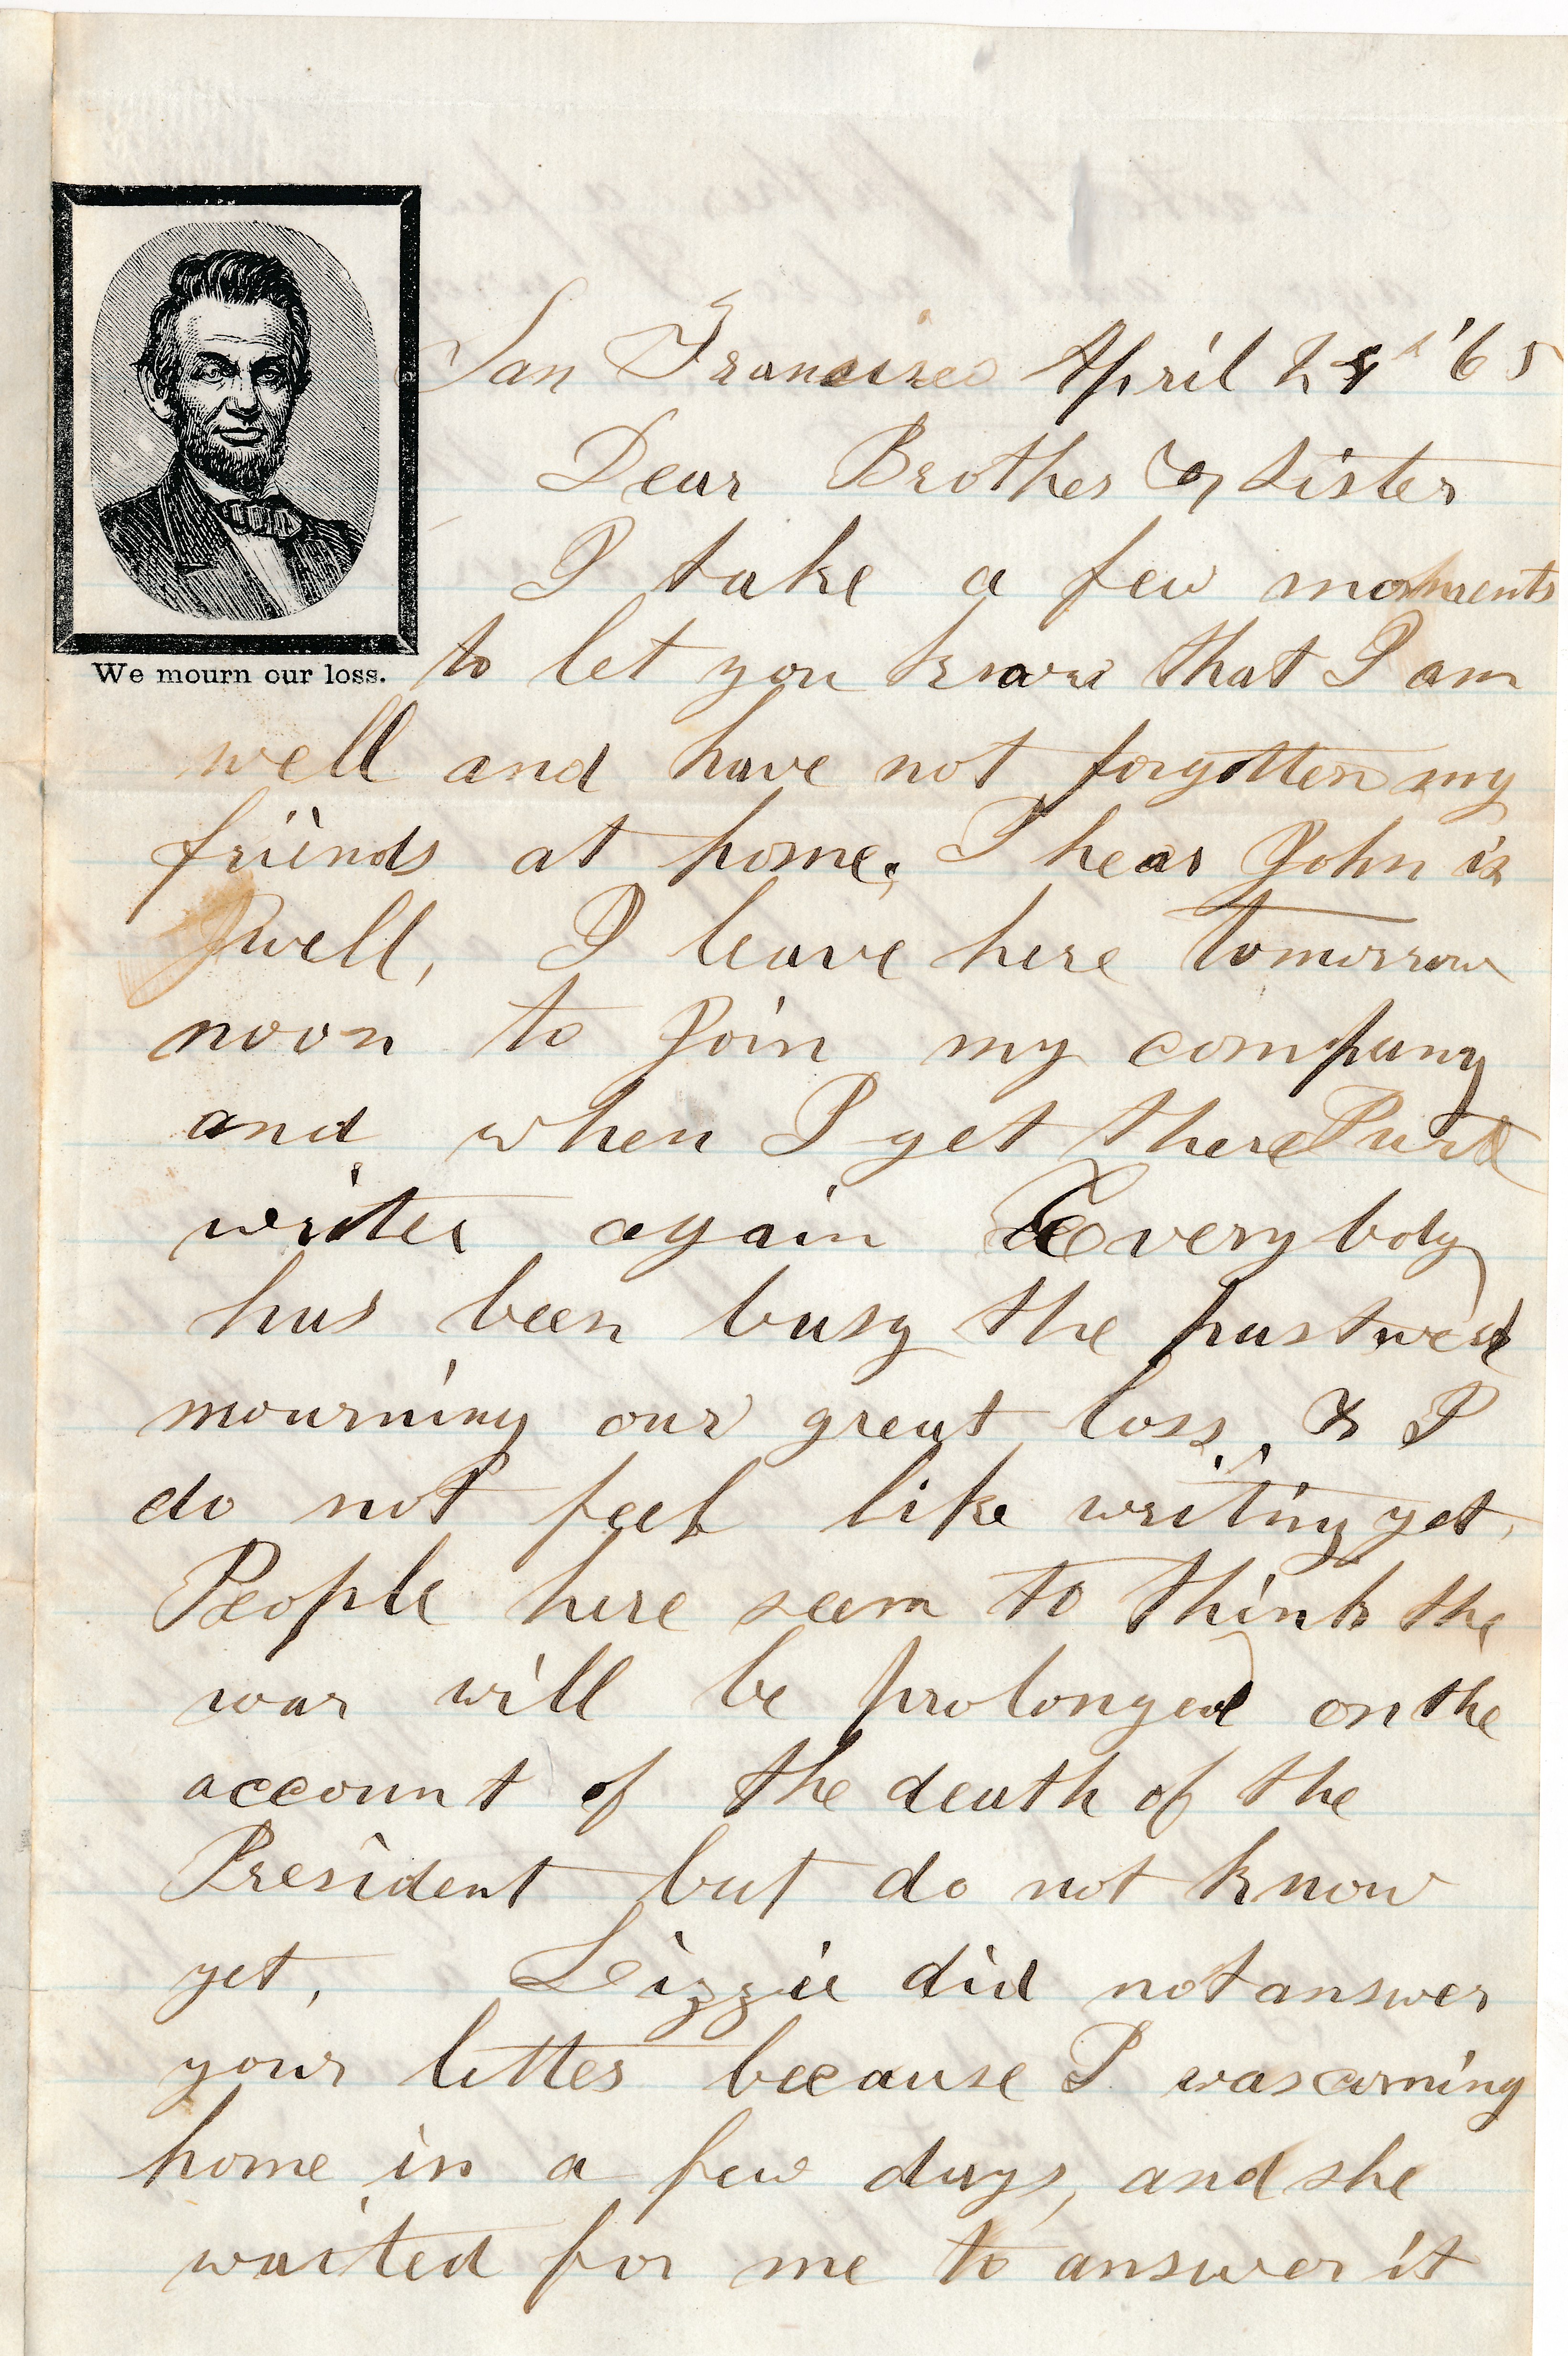 Letter from Danson C. Tolman 8th Infantry to his sister April 24, 1865